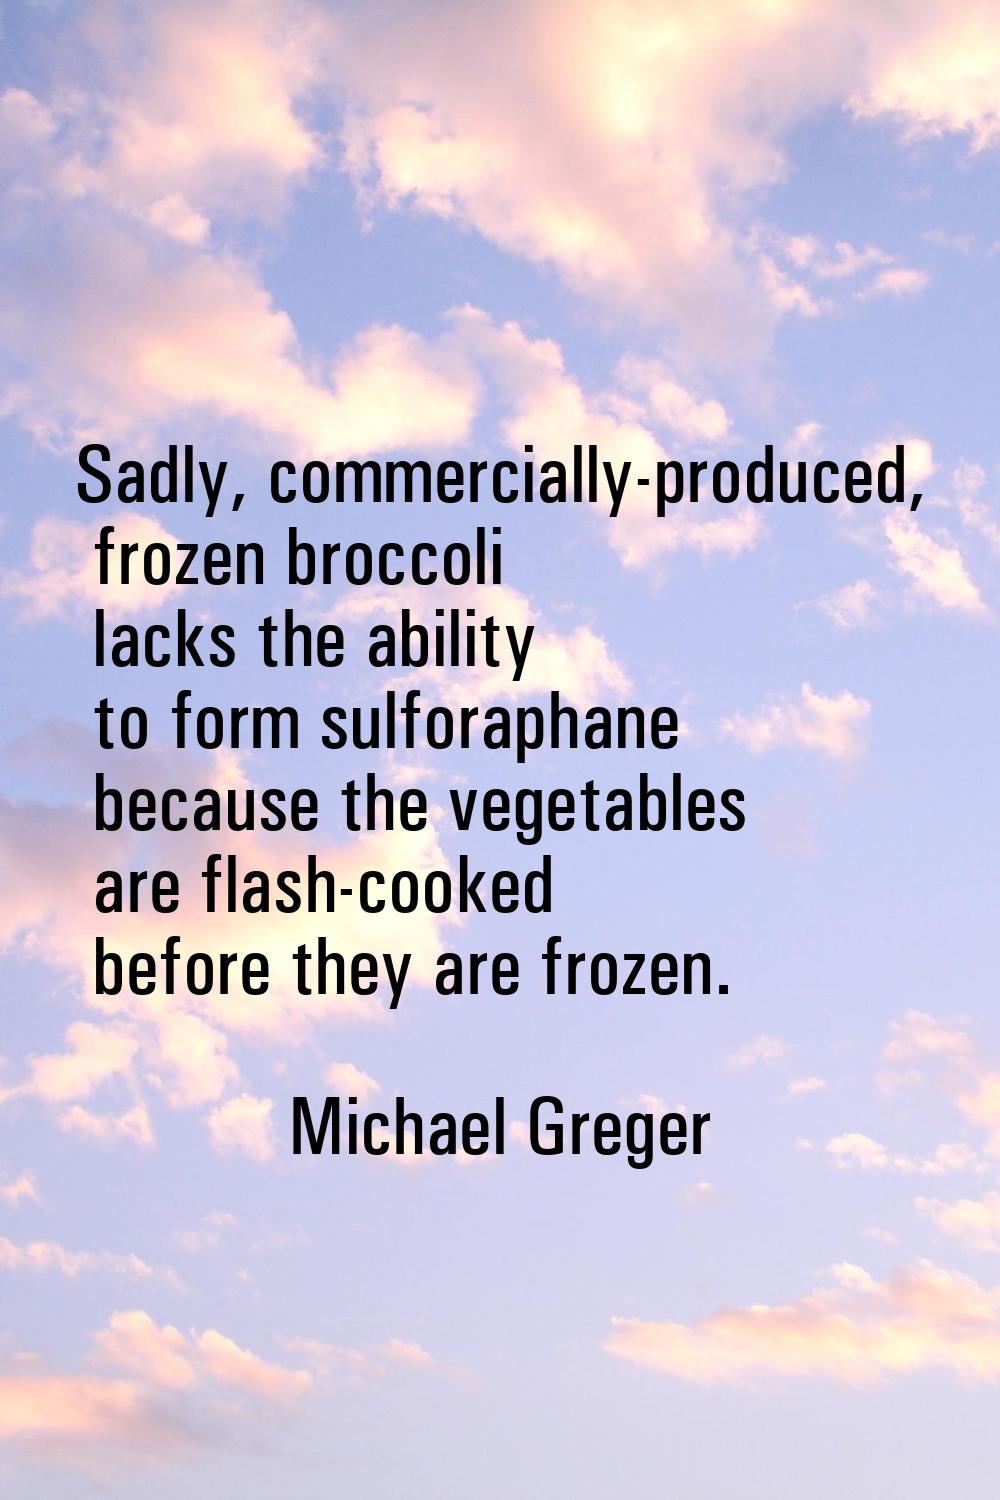 Sadly, commercially-produced, frozen broccoli lacks the ability to form sulforaphane because the ve